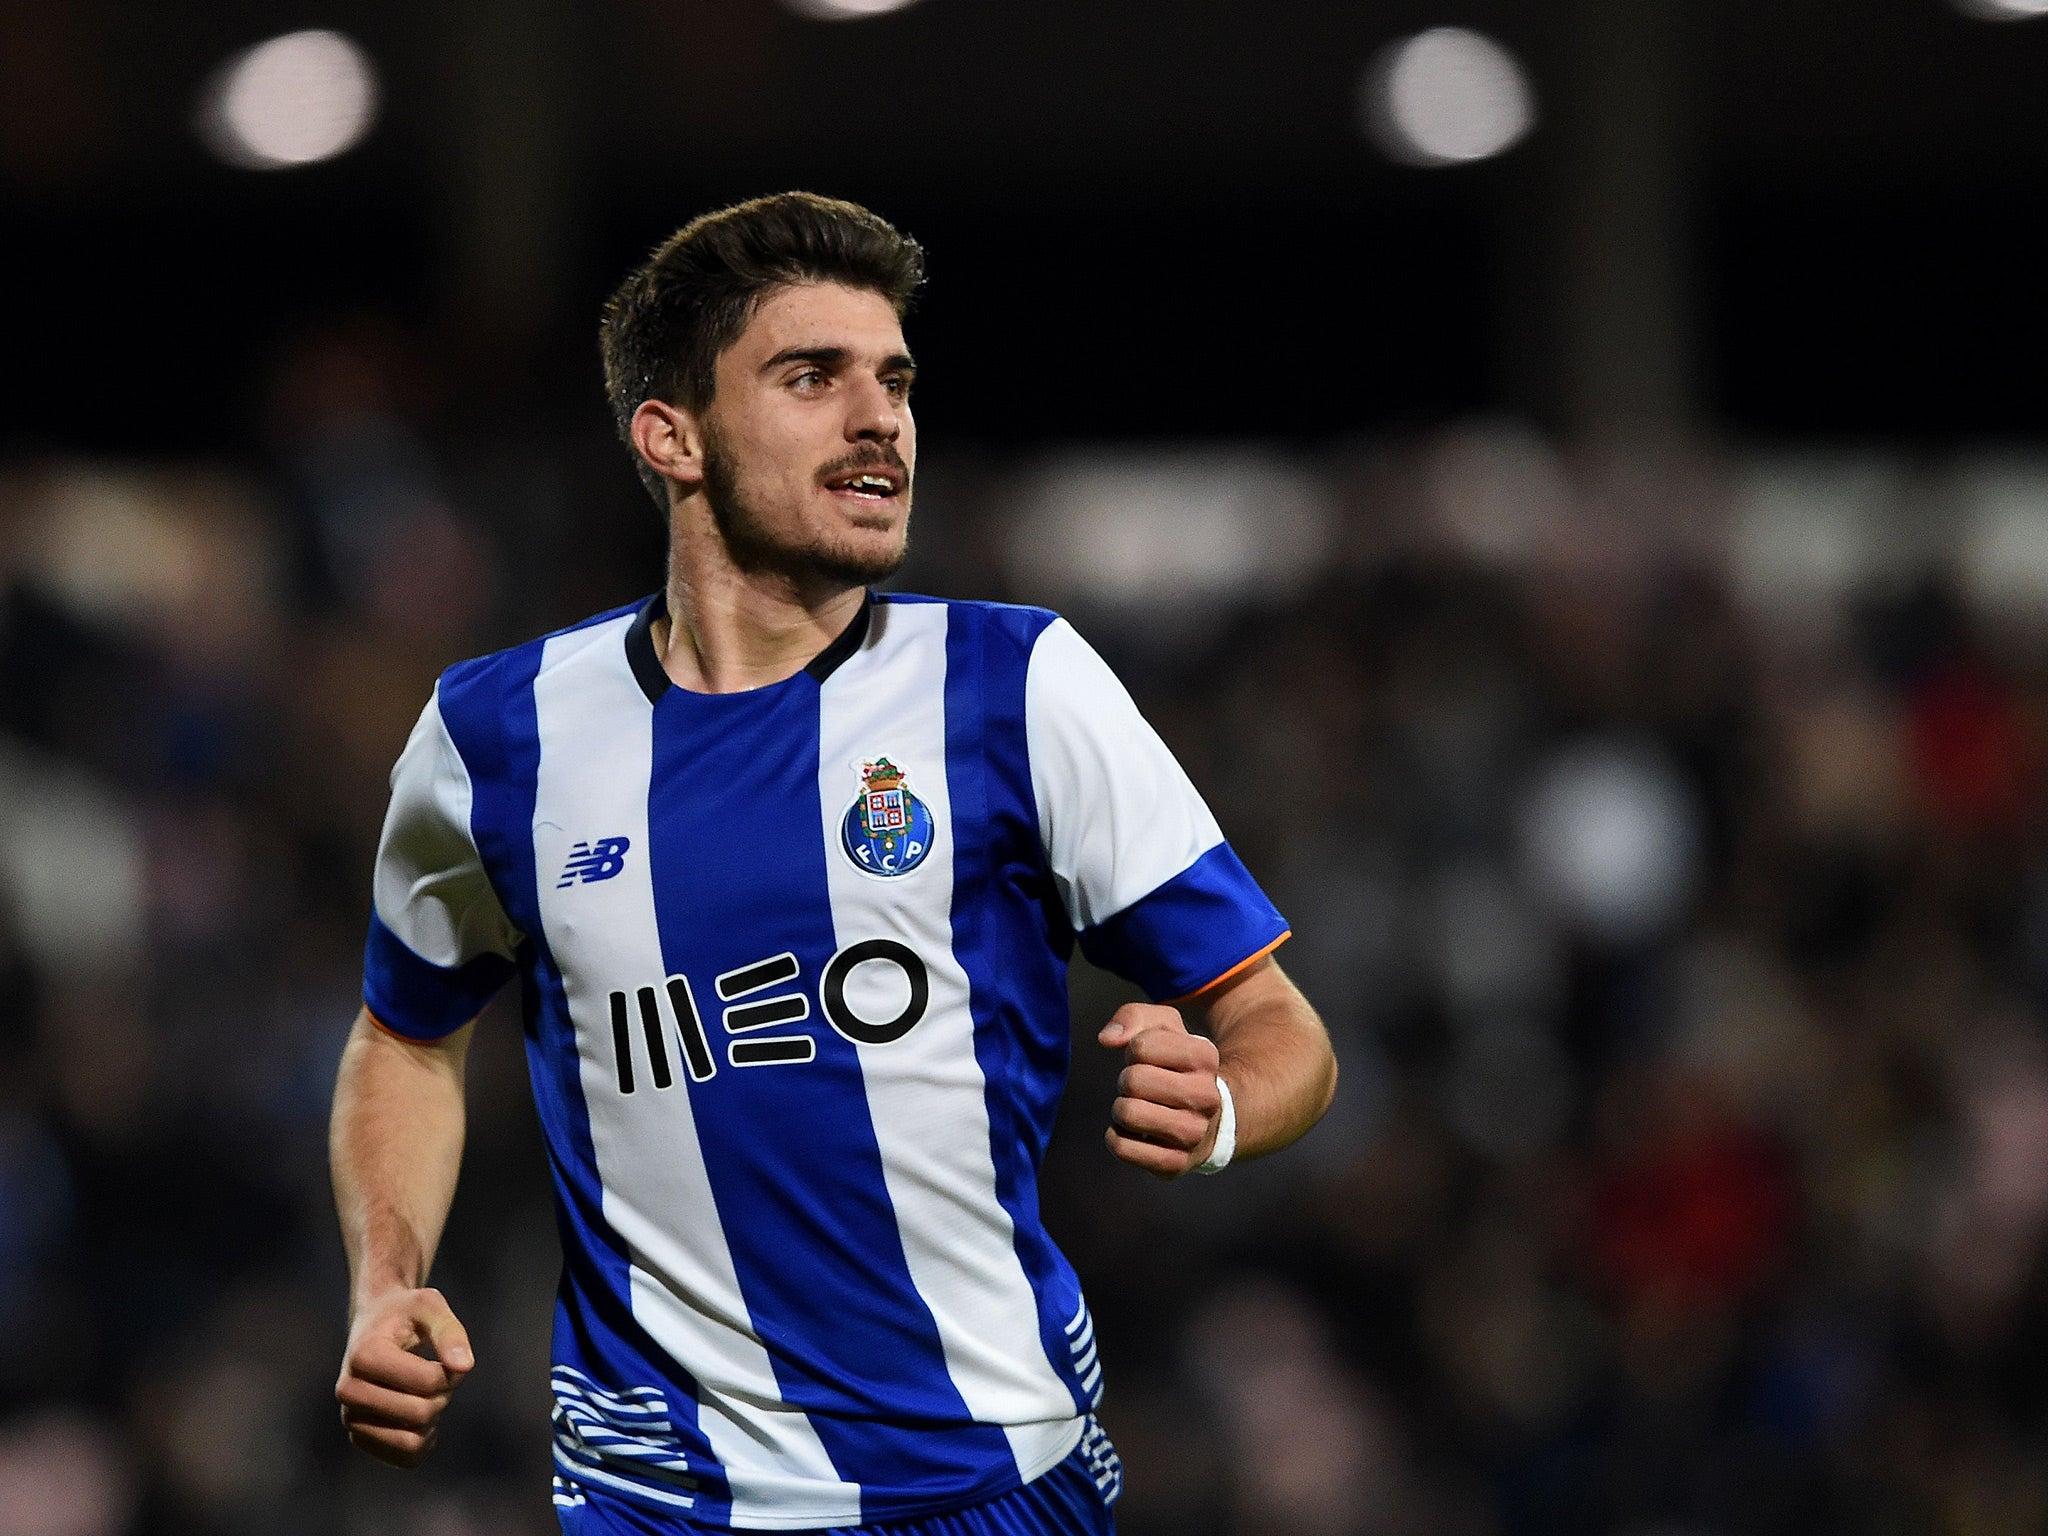 Why does Ruben Neves' transfer to Wolves sit so uncomfortably?